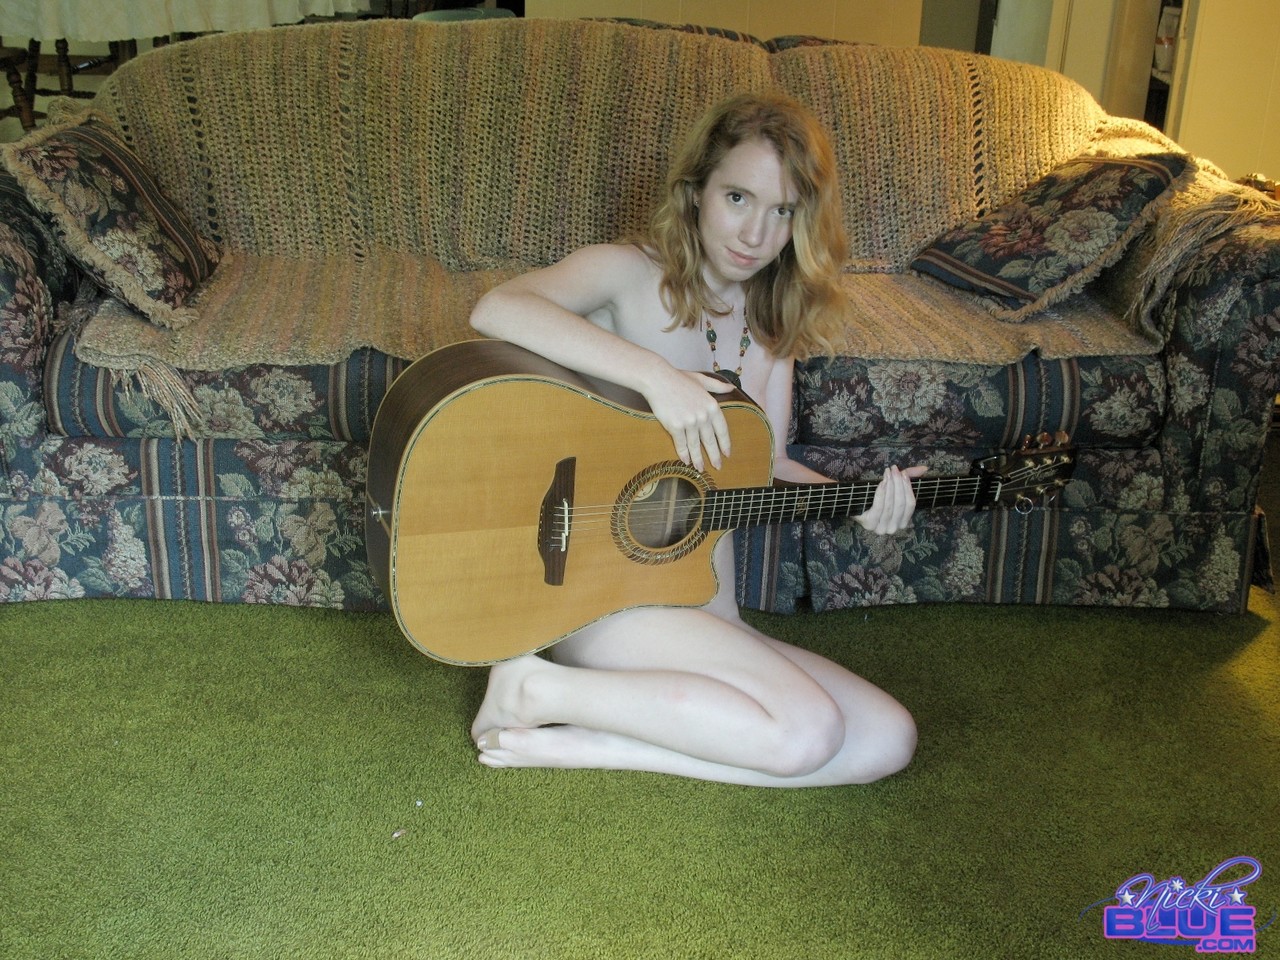 19-year-old babe Nicki Blue posing nude with a guitar in her hands 포르노 사진 #424548935 | Pornstar Platinum Pics, Nicki Blue, Redhead, 모바일 포르노